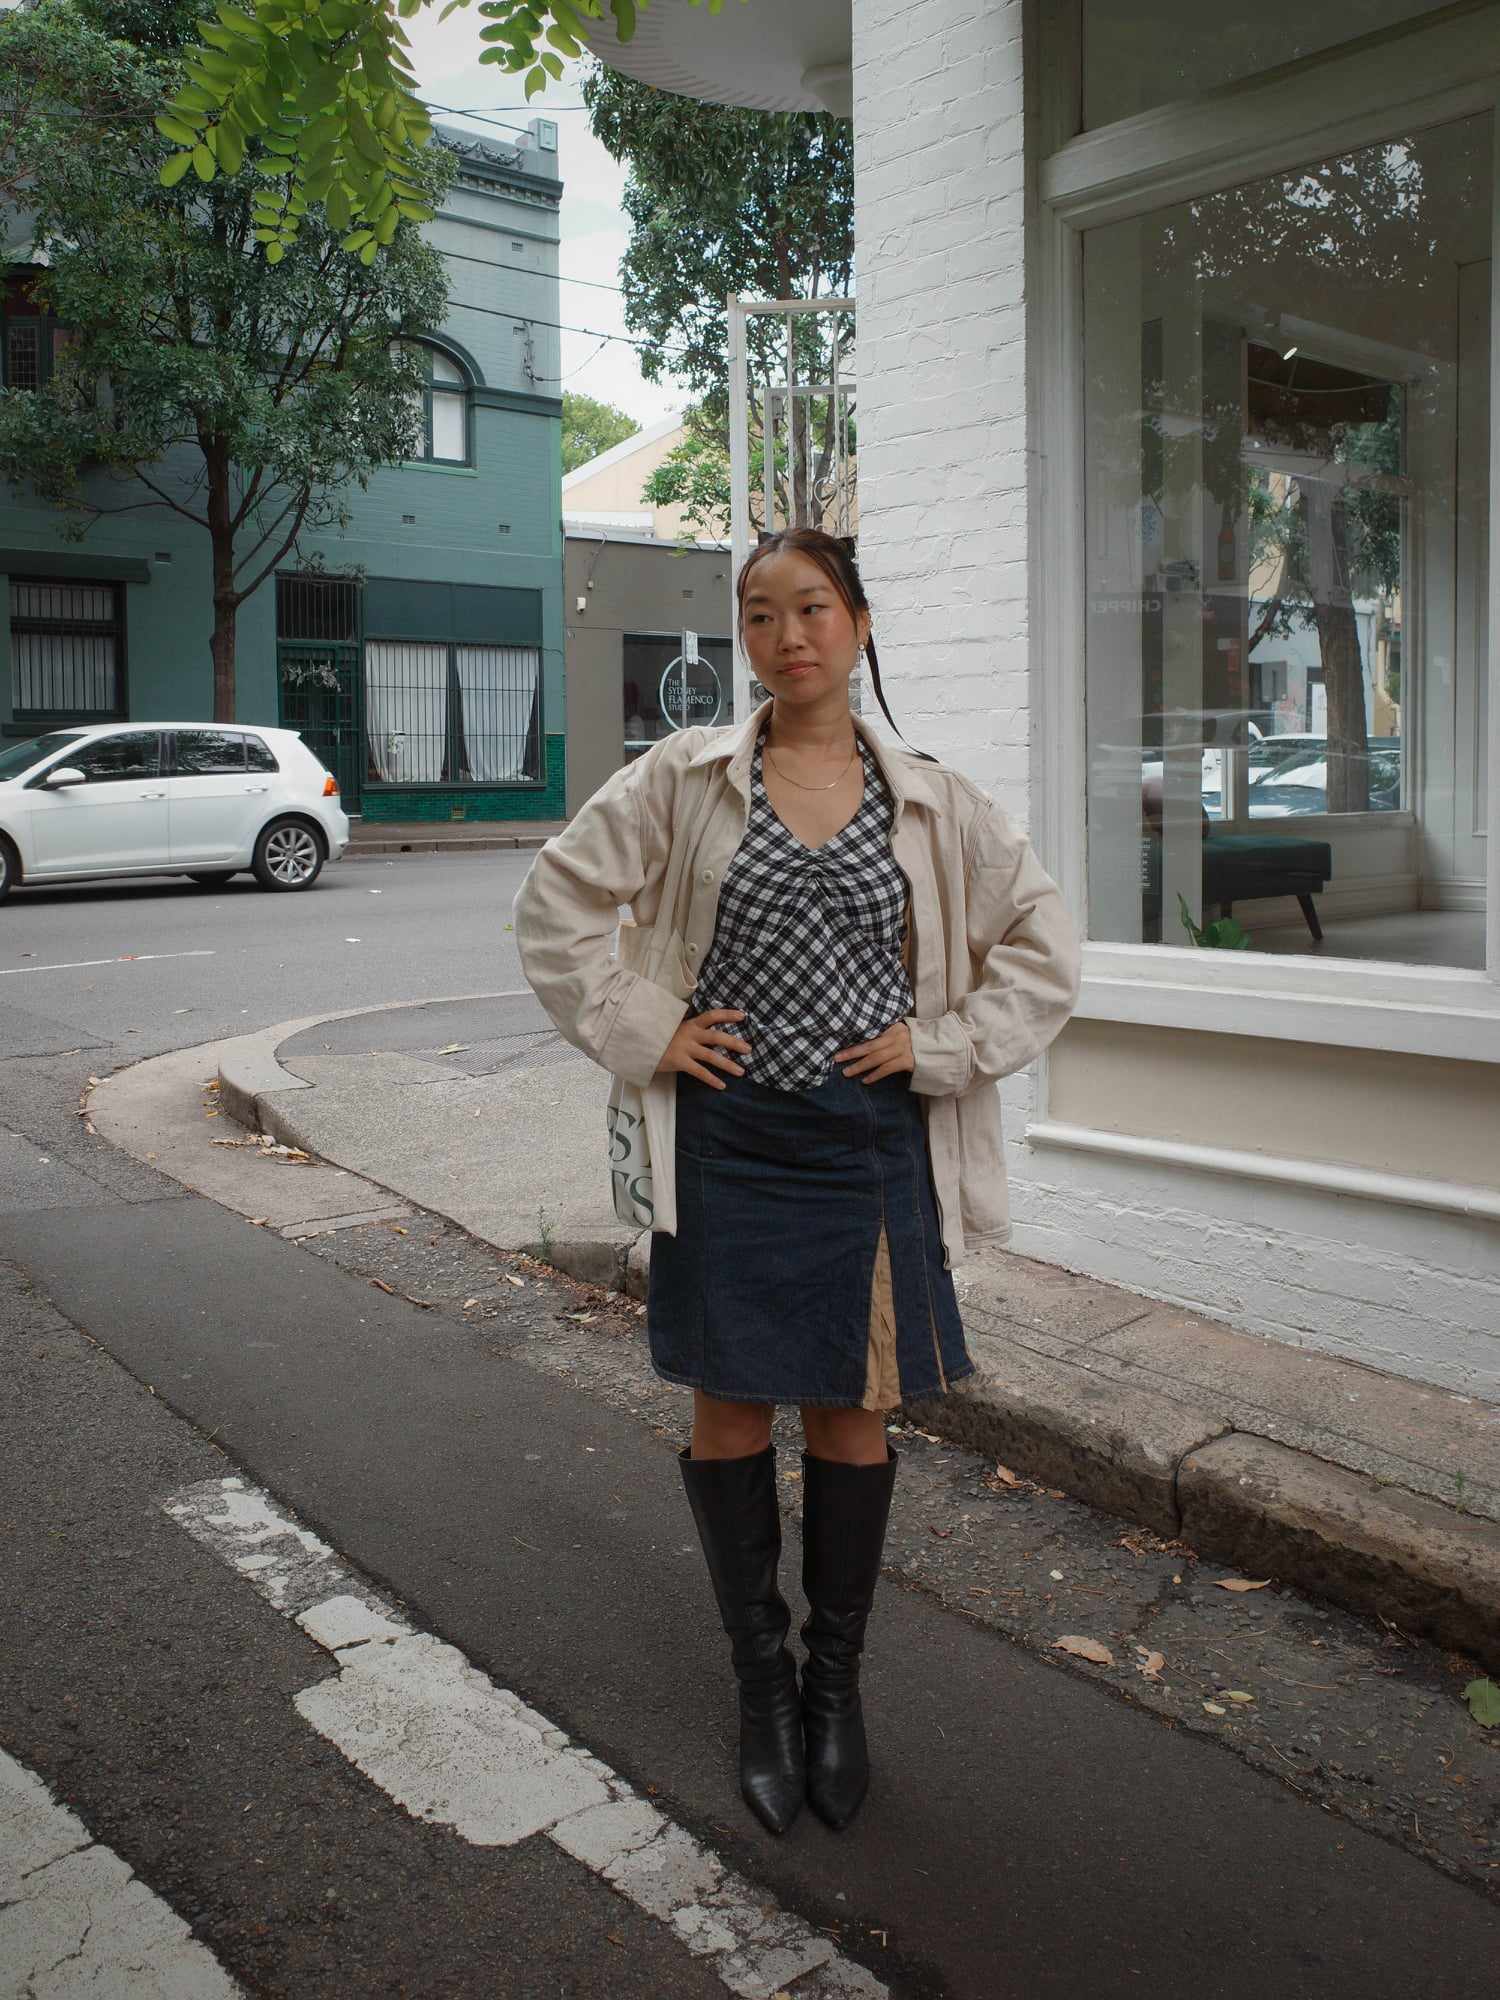 A woman stands on a street corner, wearing a trench coat, checkered blouse, denim skirt, and tall black boots, with buildings and a car in the background.